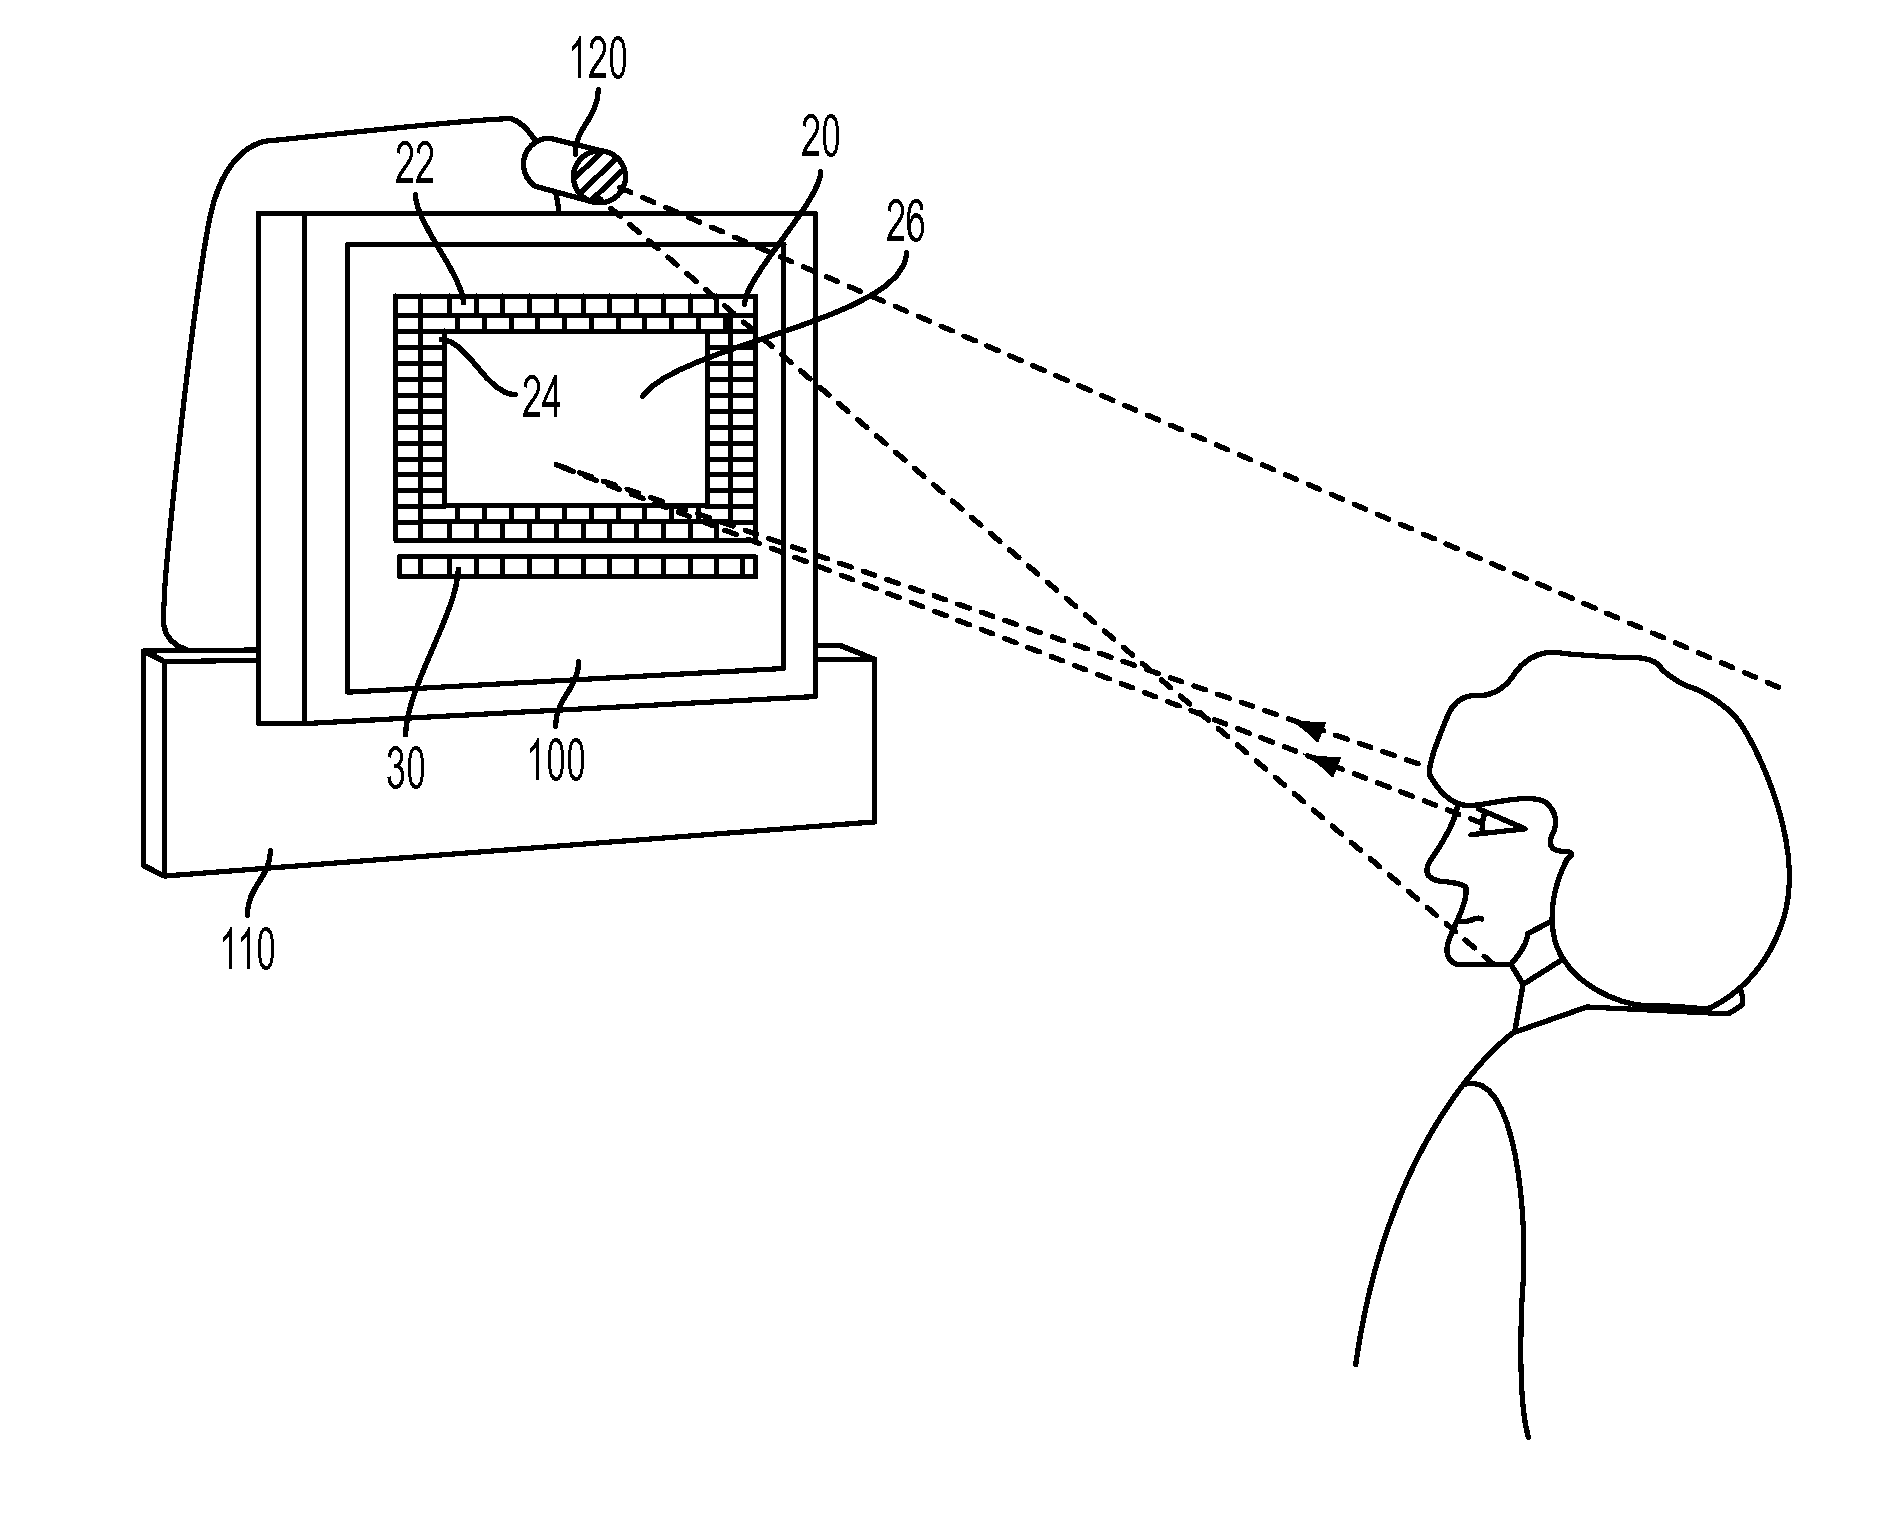 Eye typing system using a three-layer user interface